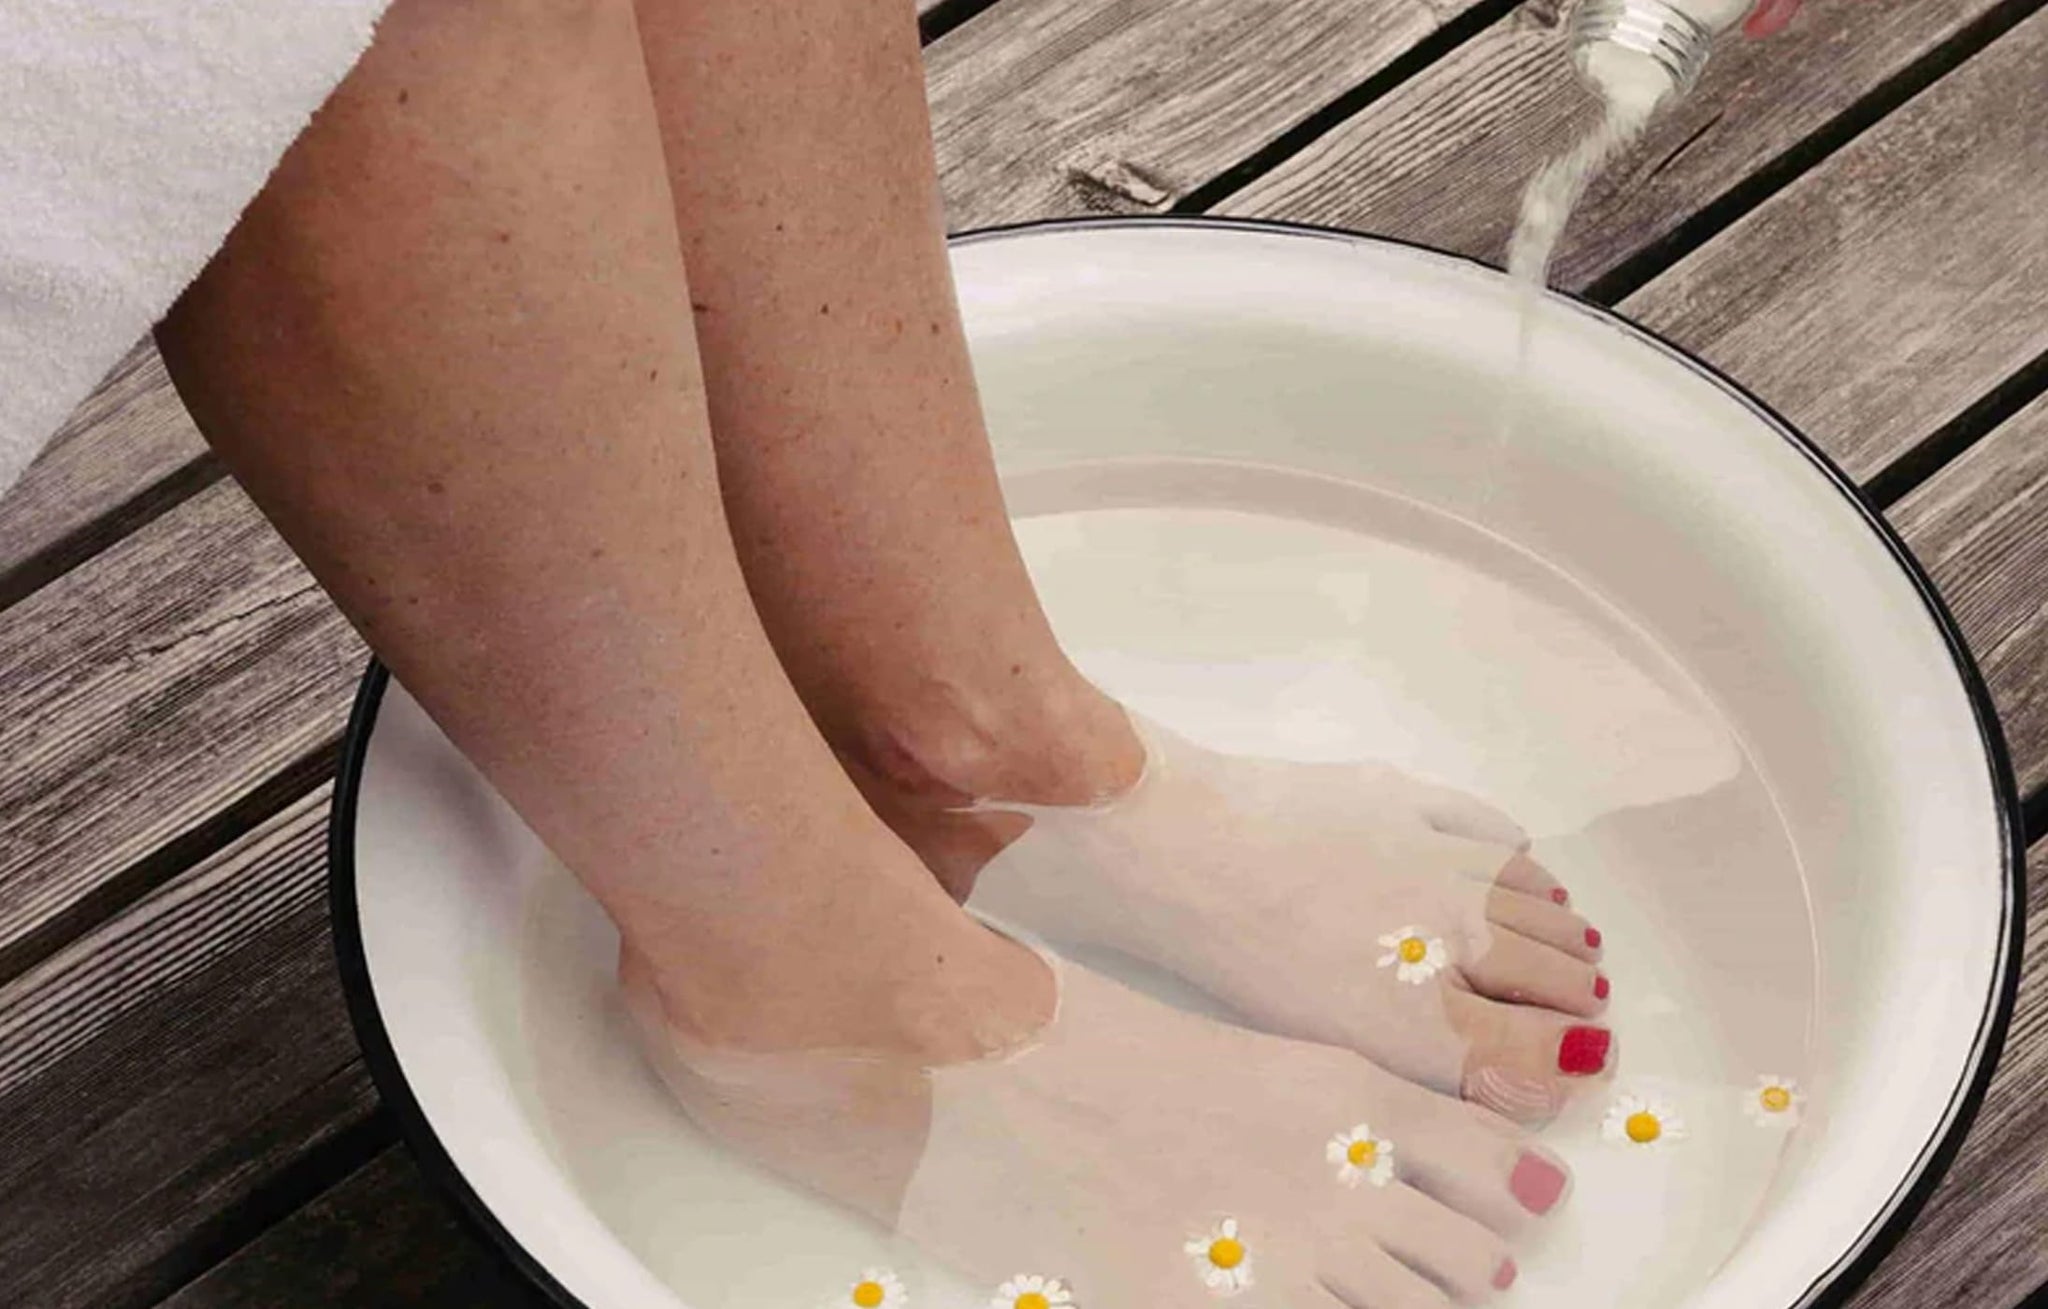 The Benefits of a TCM Foot Bath, According to Experts